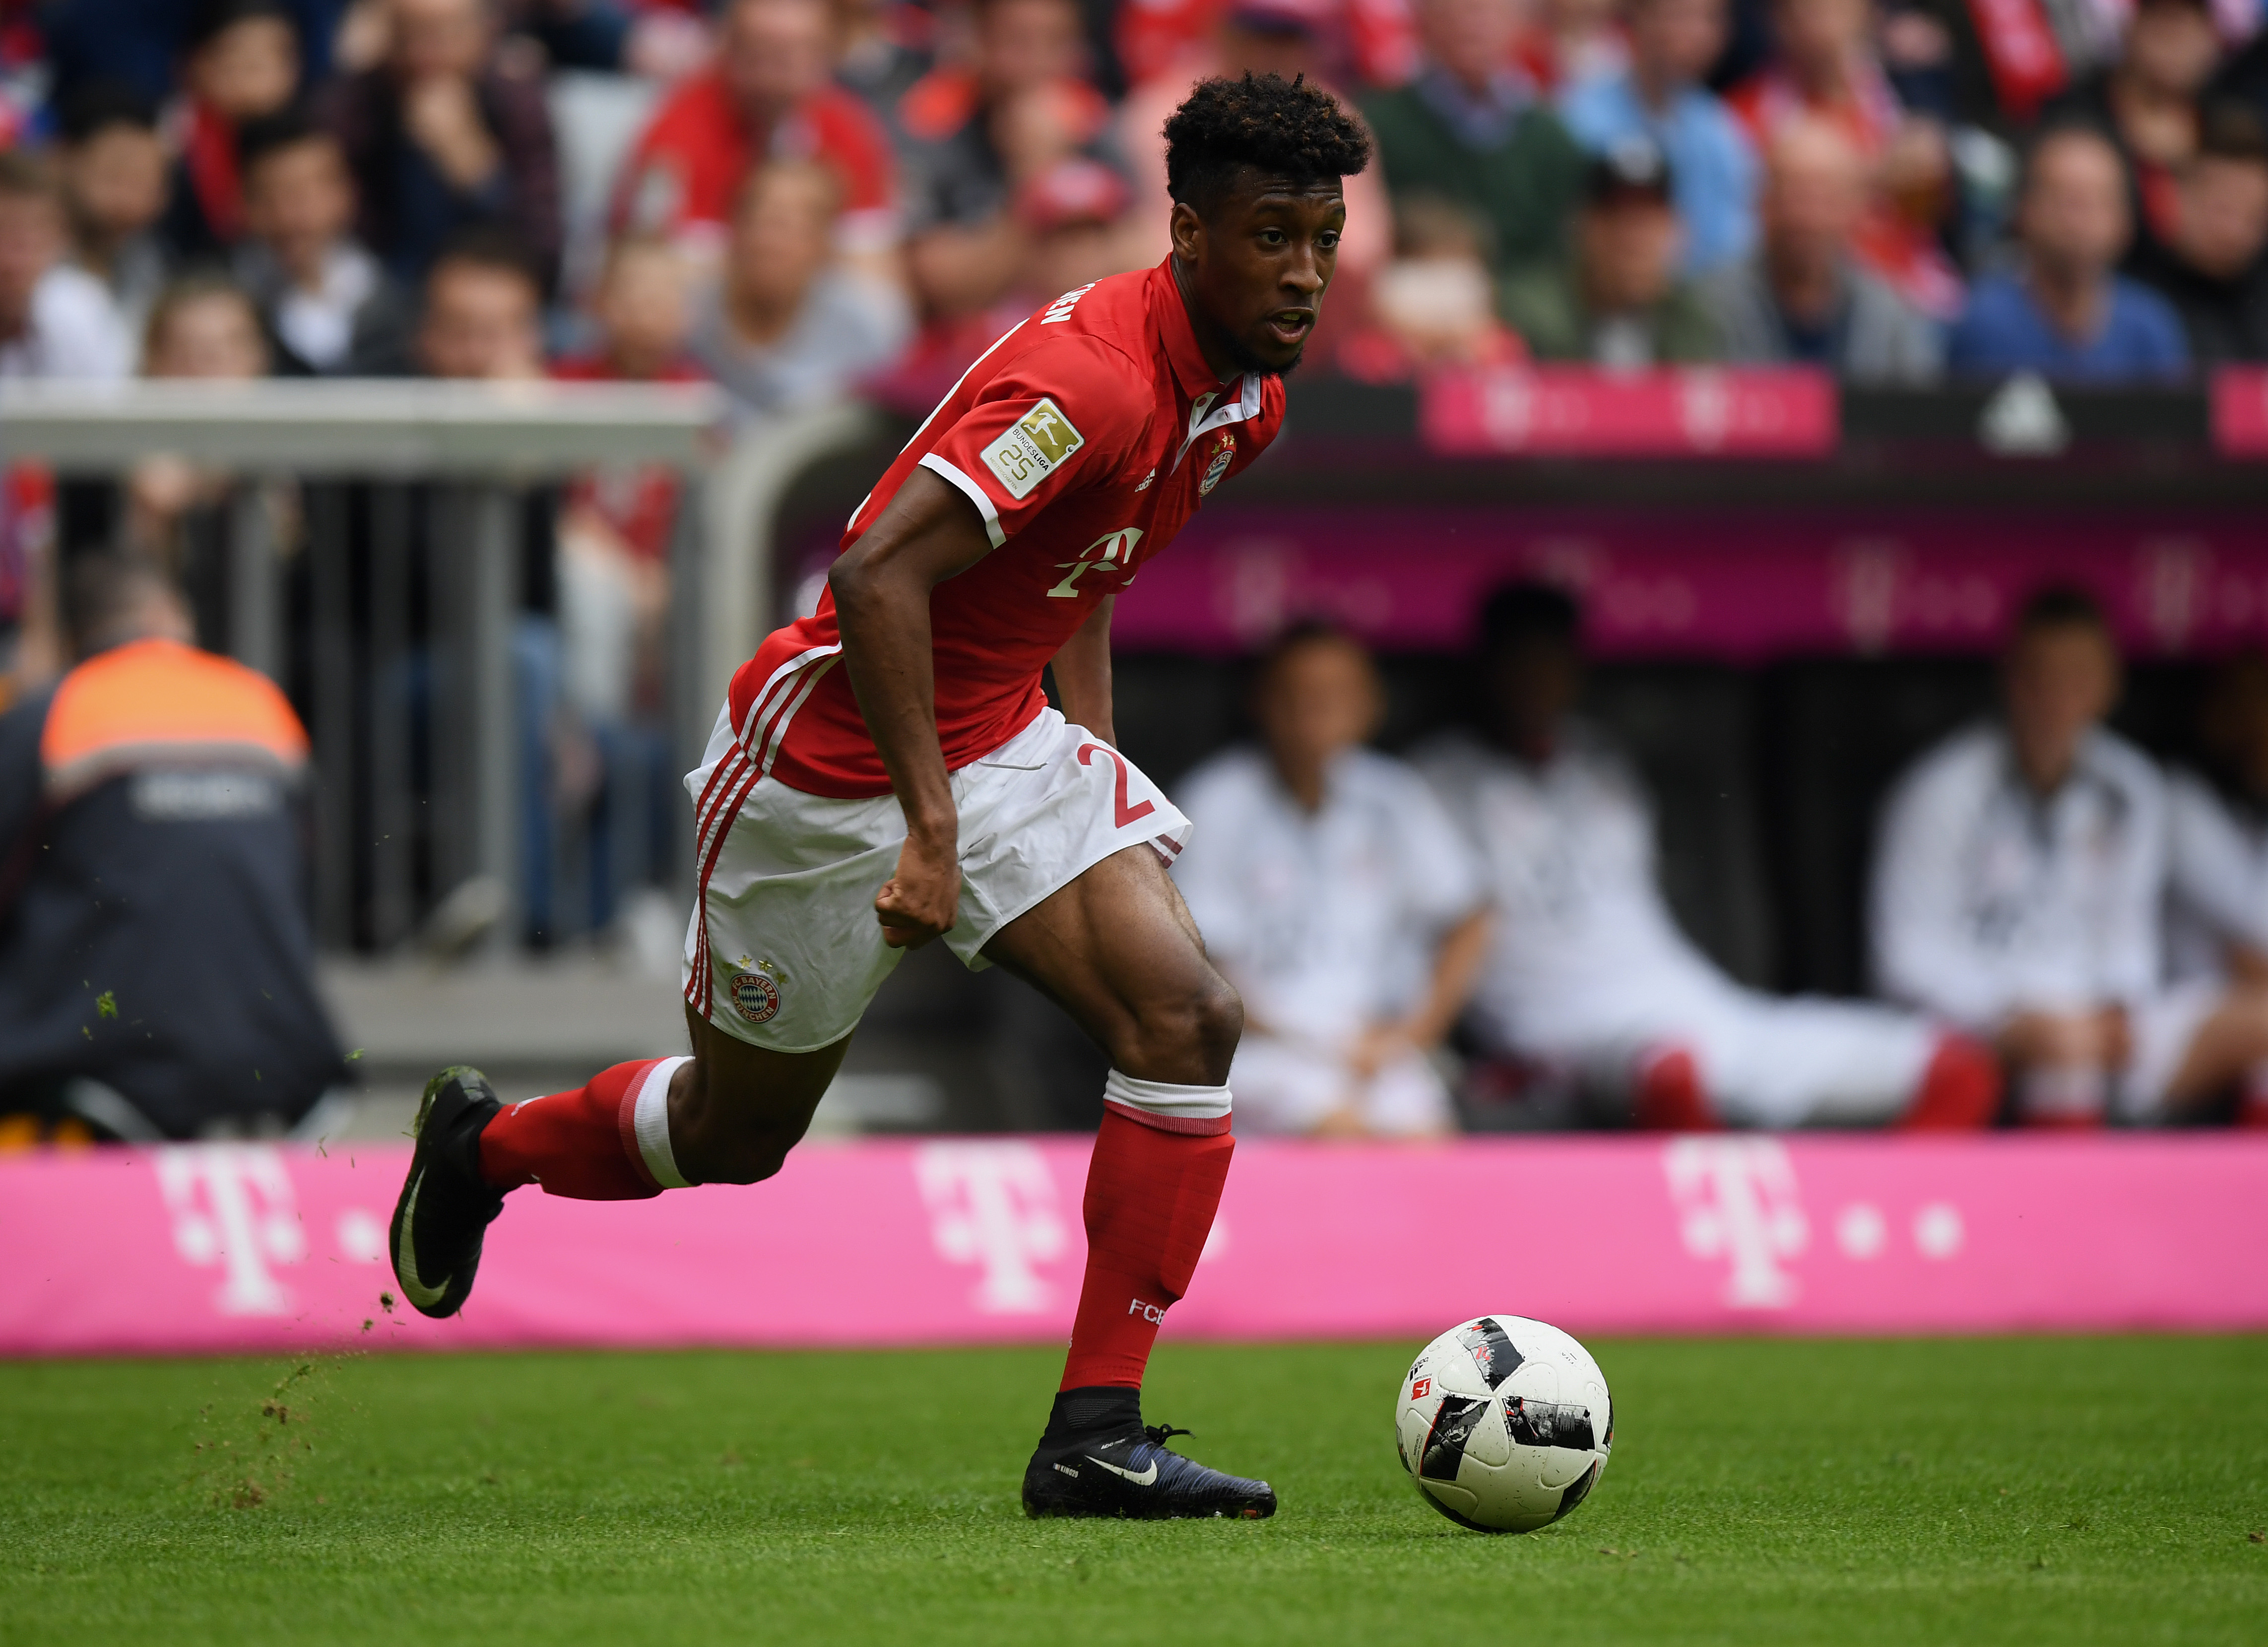 Could Coman be on his way out of Bayern next year? (Photo by Matthias Hangst/Bongarts/Getty Images)